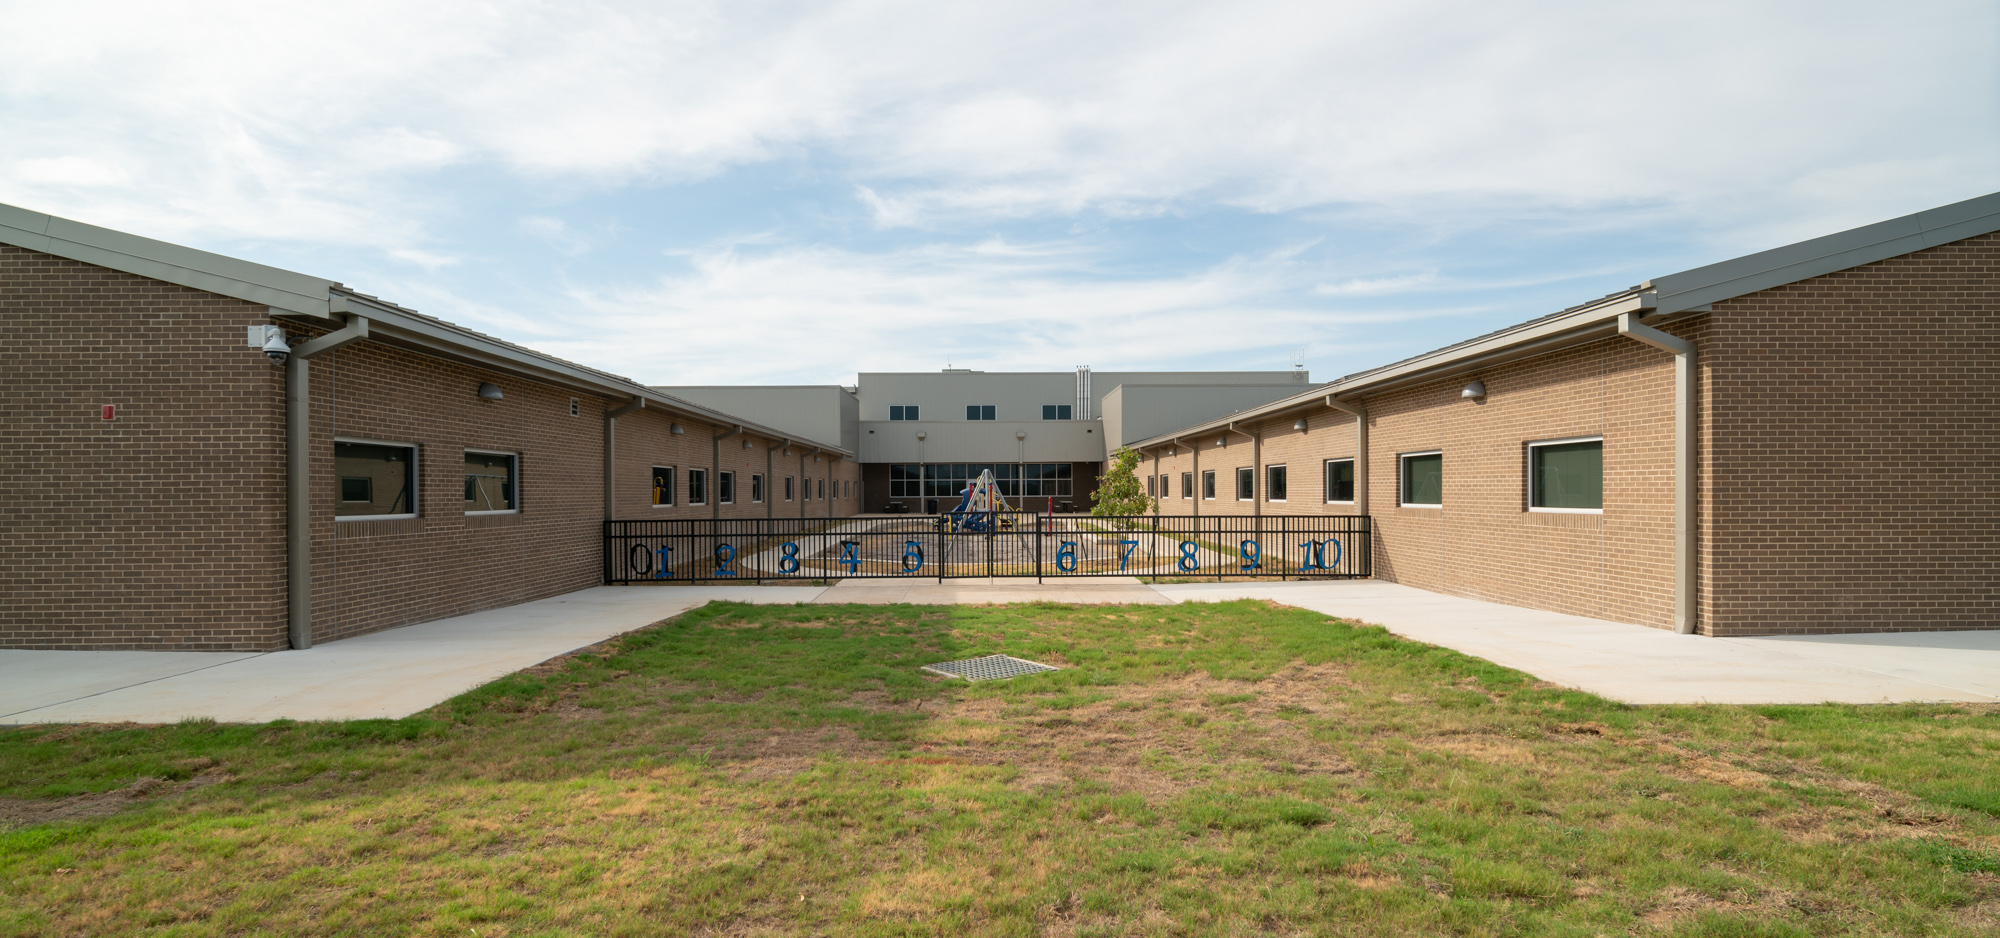 Additions Completed at Veramendi Elementary